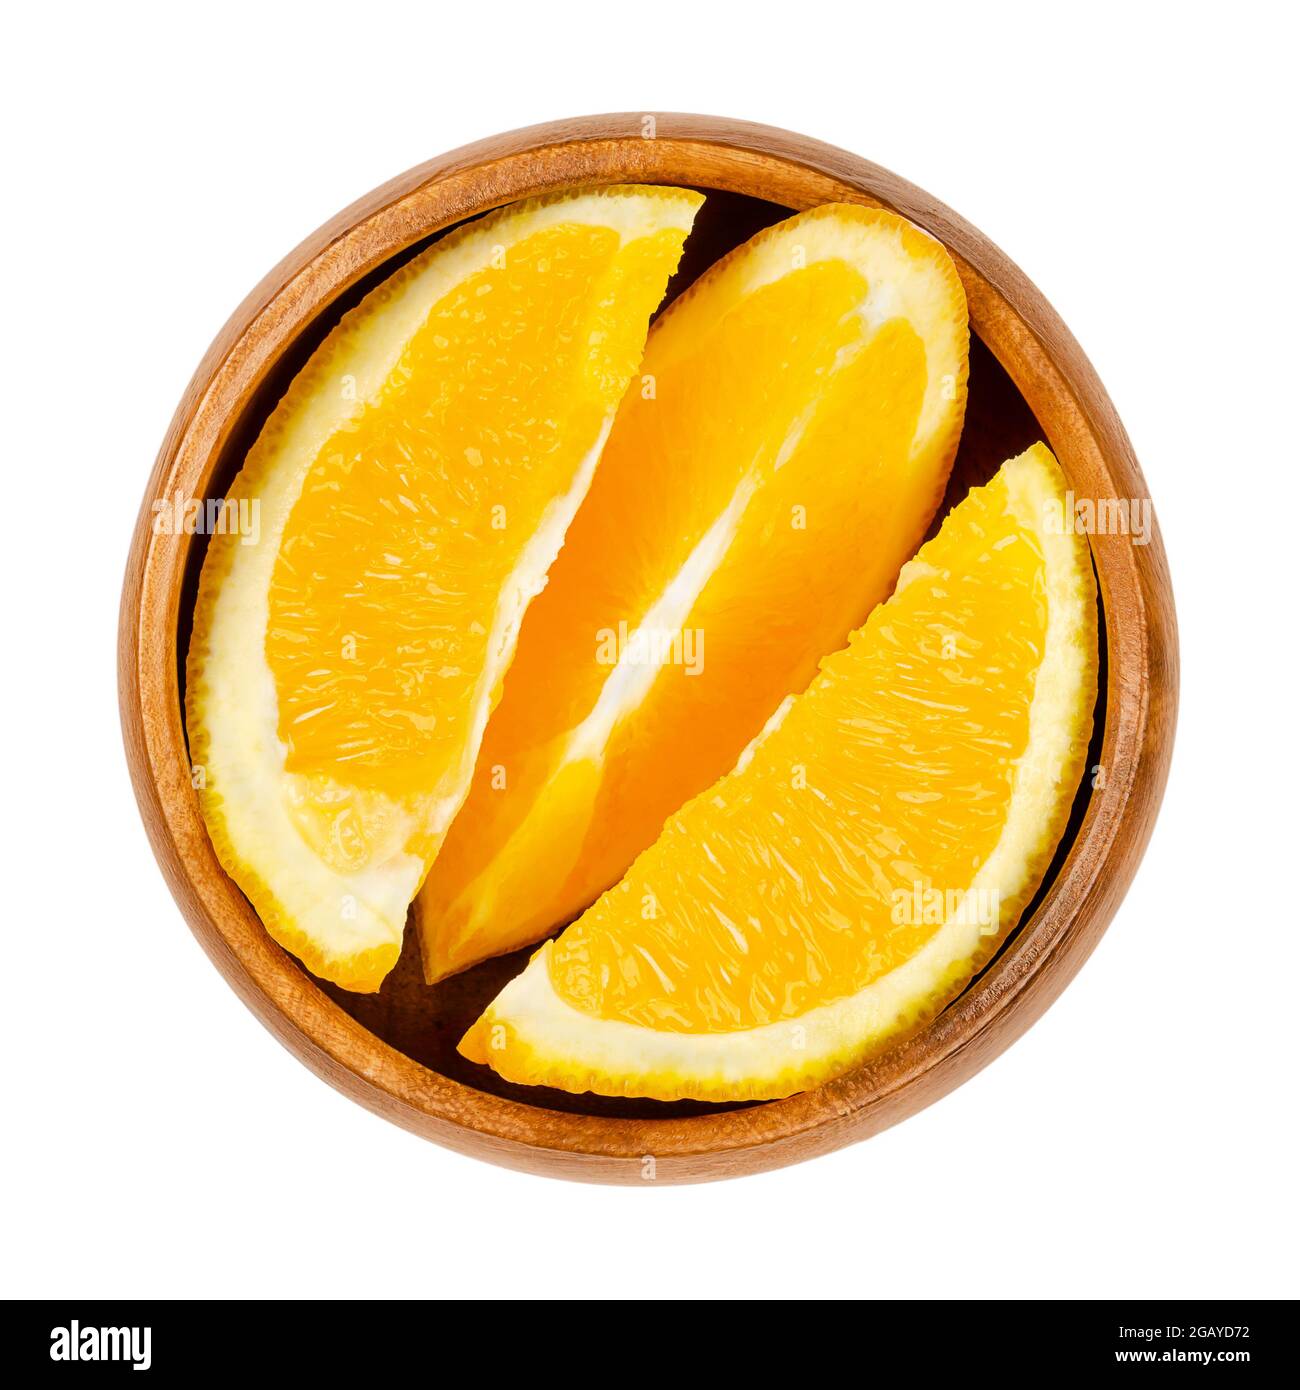 Orange slices, in a wooden bowl. Fresh cut oranges, sliced ripe and sweet fruits with yellow, and juicy fruit flesh. Three wedges. Stock Photo